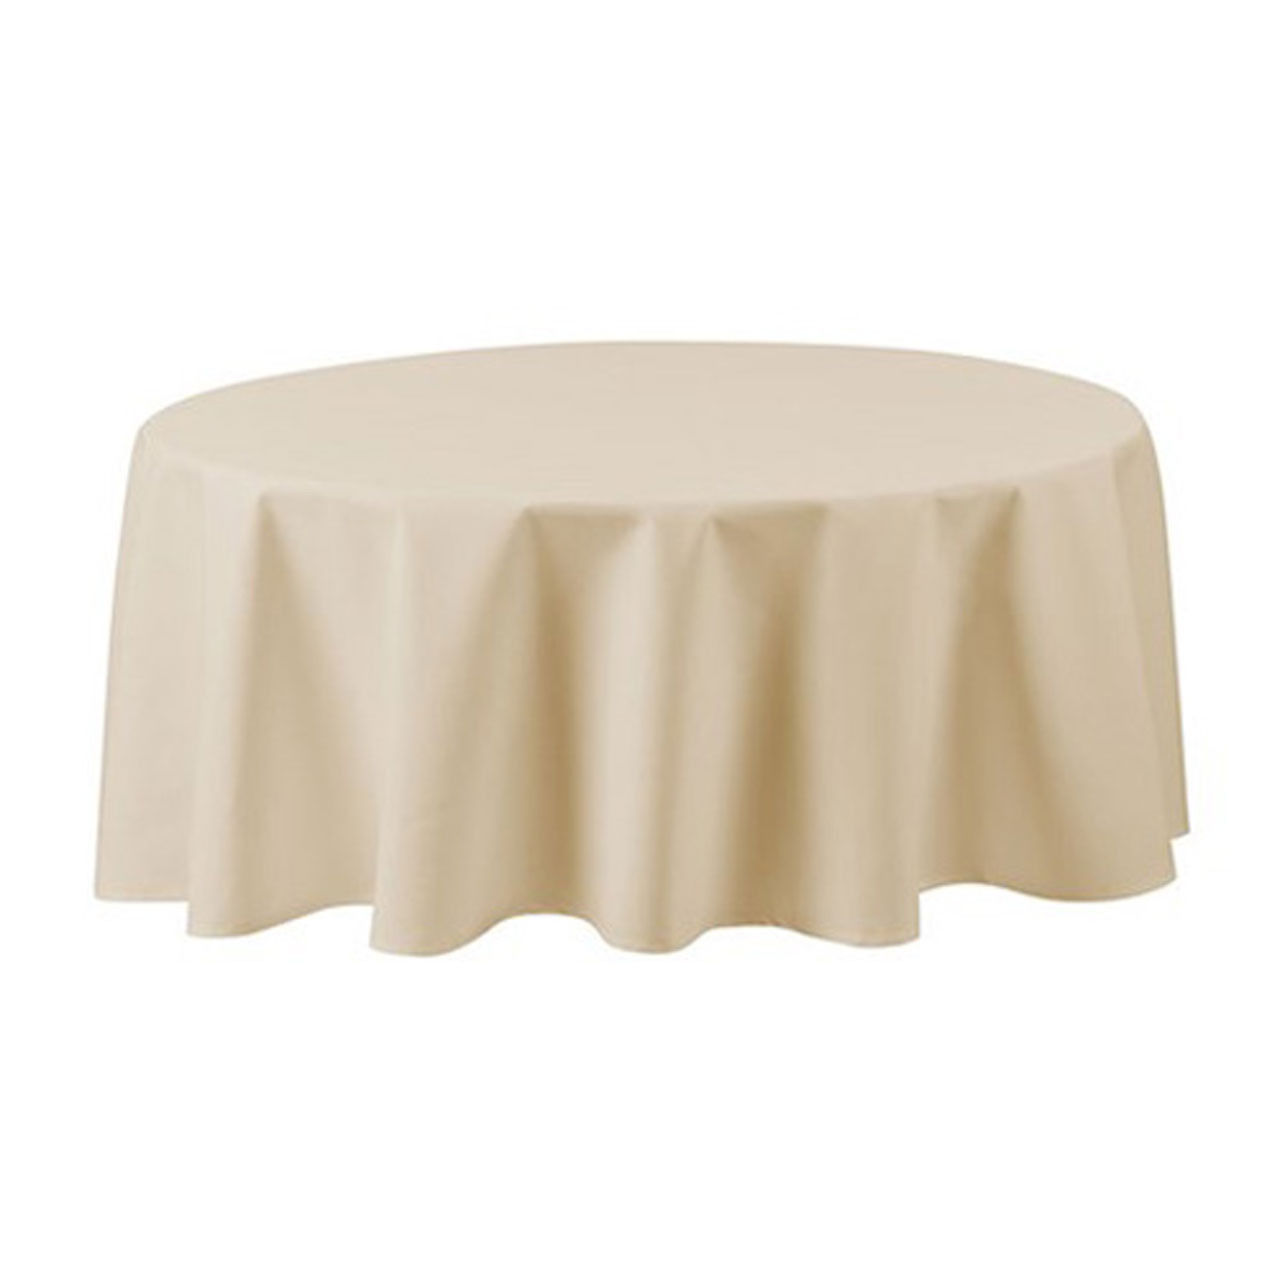 Do the 120 ivory round tablecloths have any special finishes?